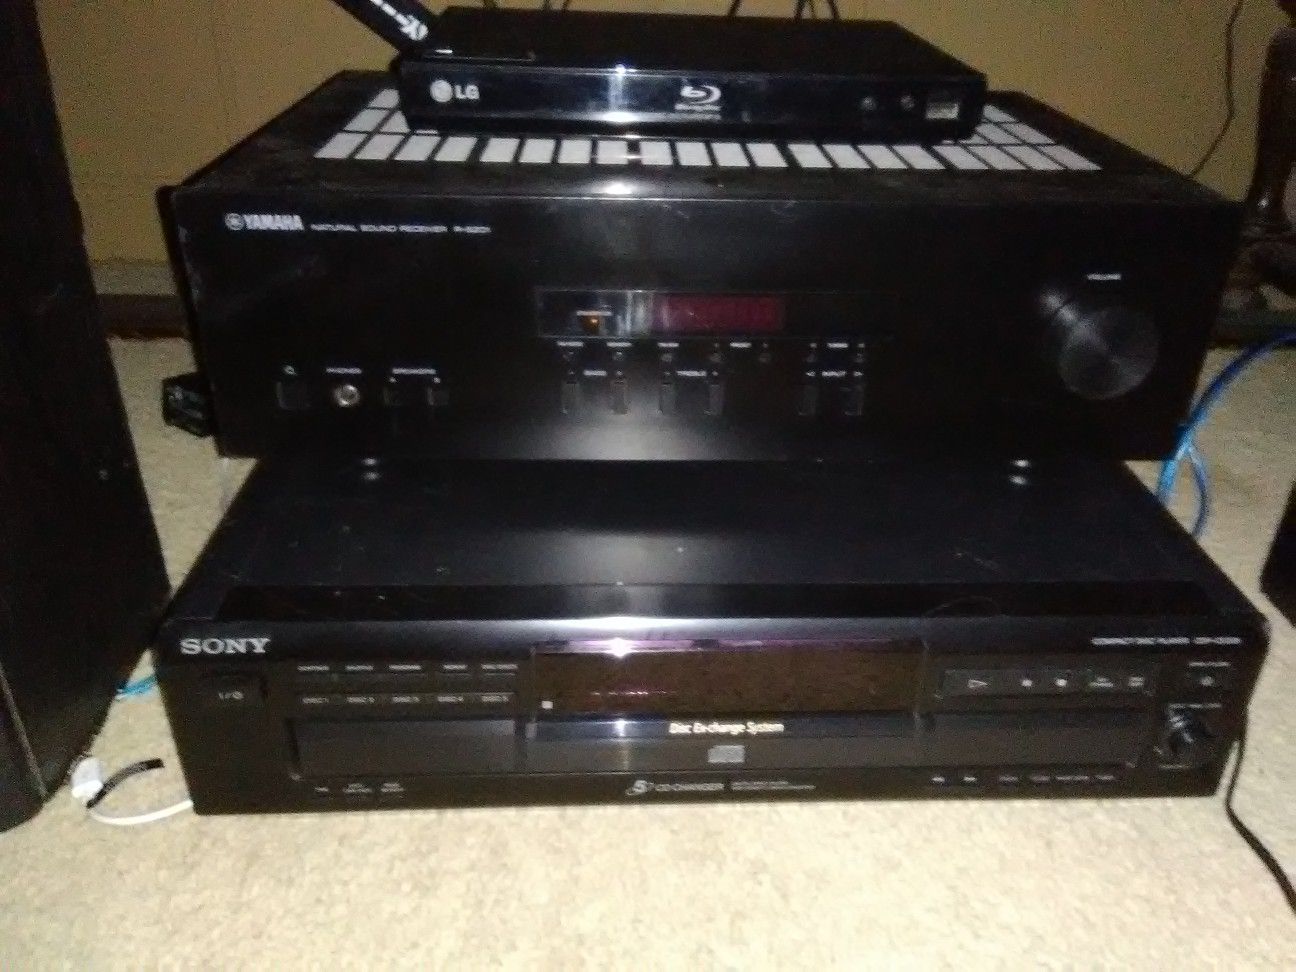 Yamaha receiver and Sony 5 disc changer with pair of Sony speakers